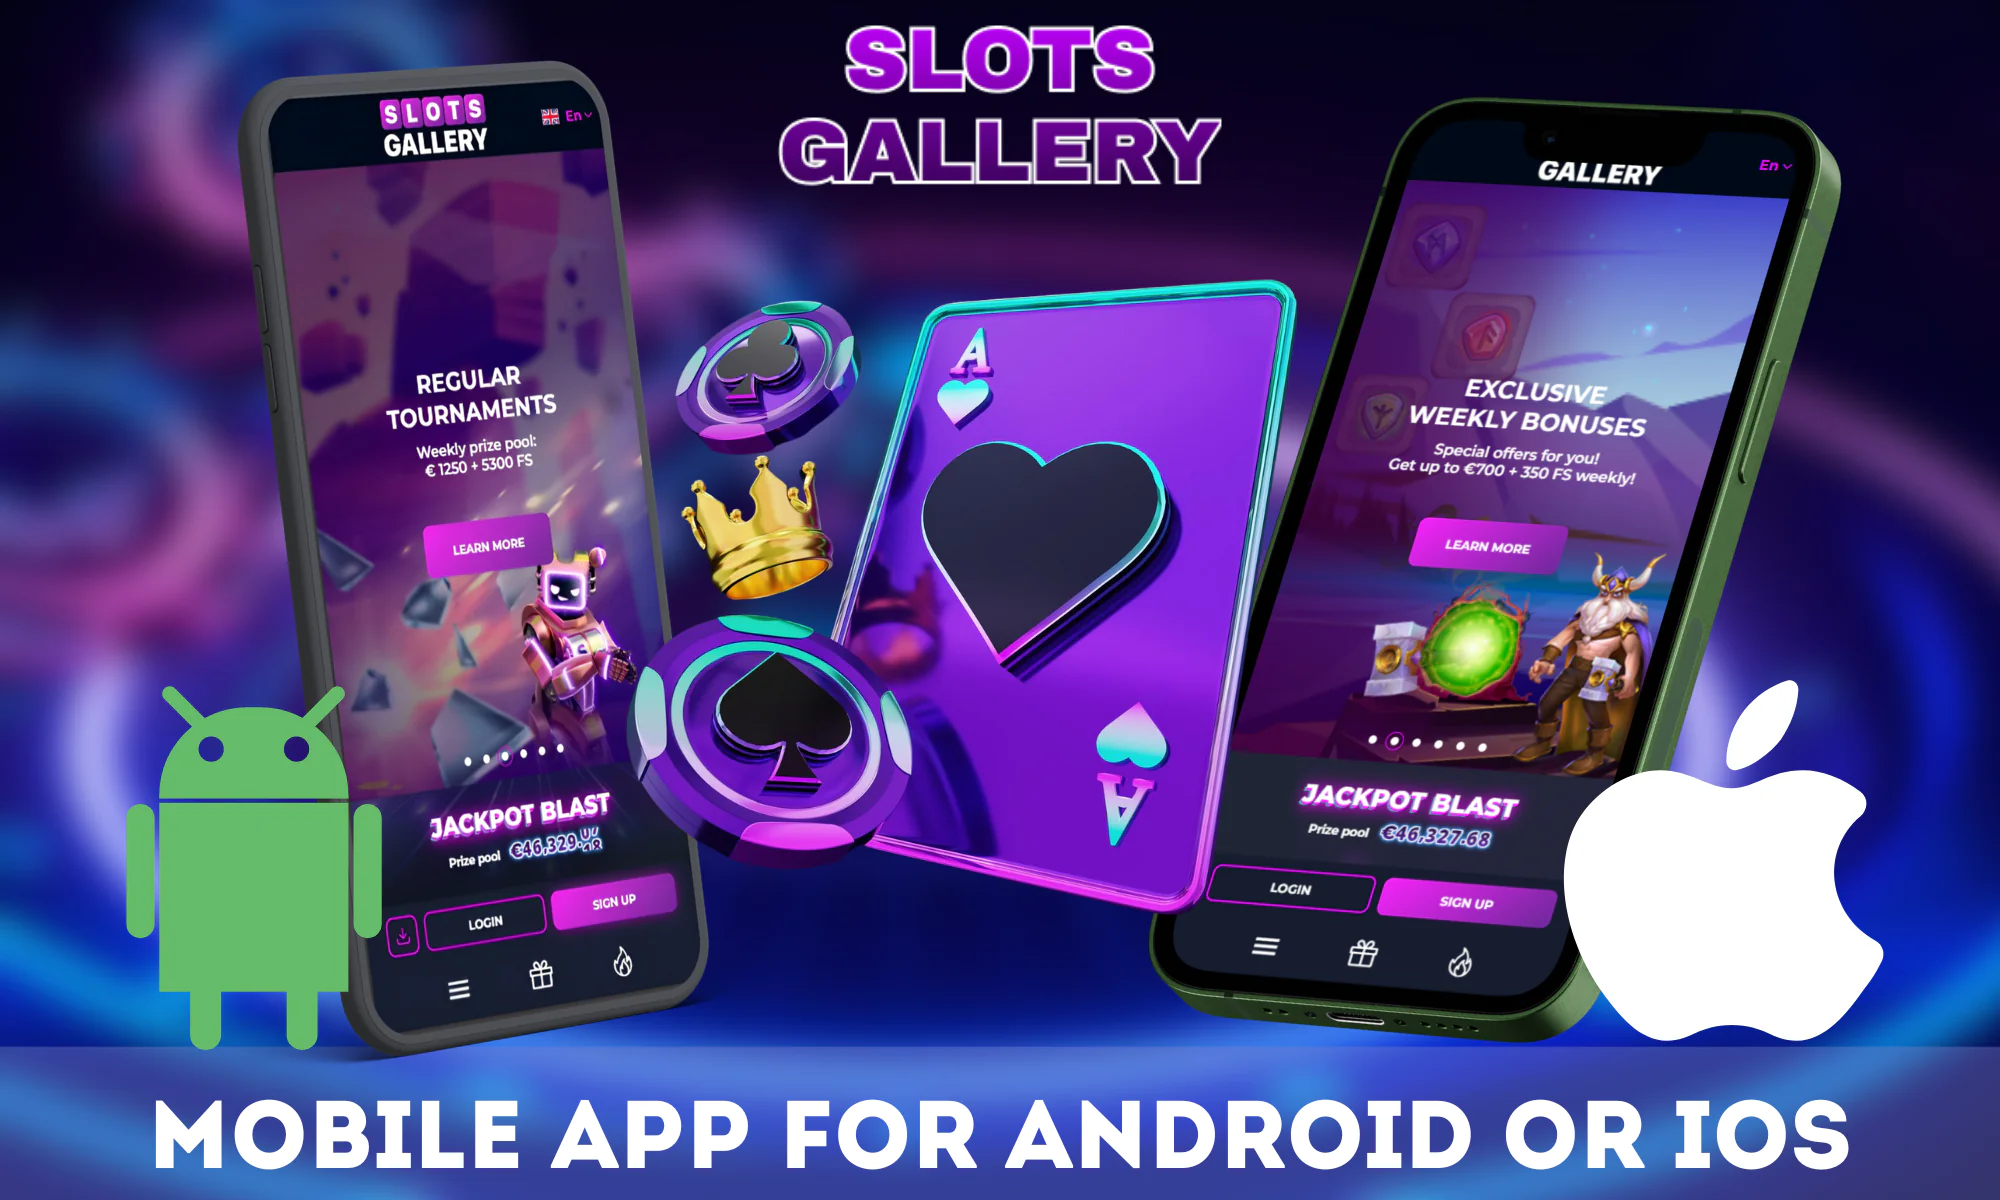 Slots Gallery Casino has a perfectly optimized and fast mobile application that is available on both Android and iOS